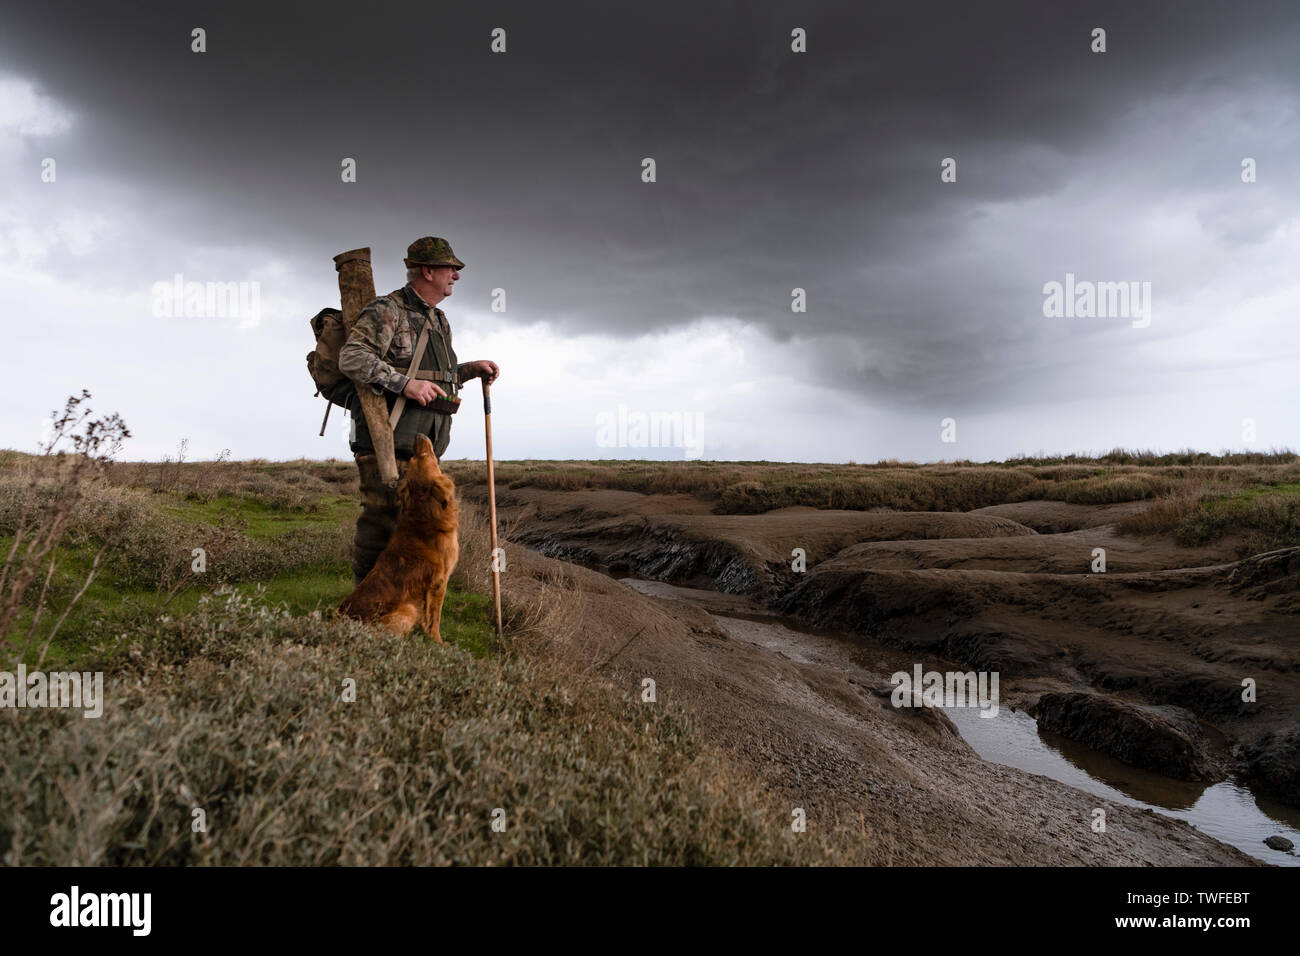 Wildfowling on the Lincolnshire Wash with shooter and gundog walking through the marshes with storm clouds and rain. Stock Photo